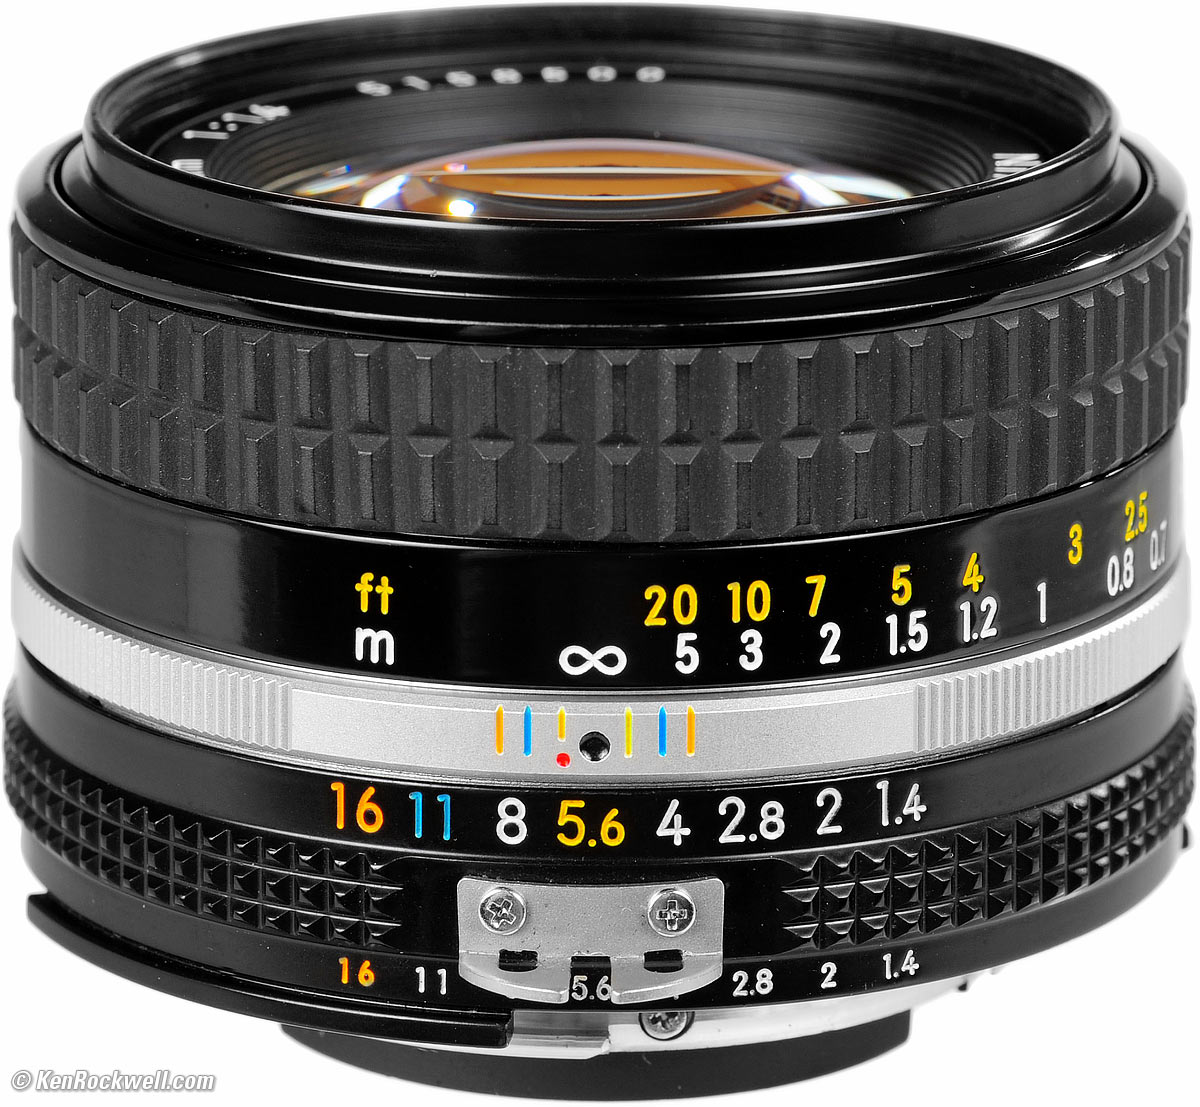 Nikon NIKKOR 50mm f/1.4 AI-s Review & Sample Images by Ken Rockwell